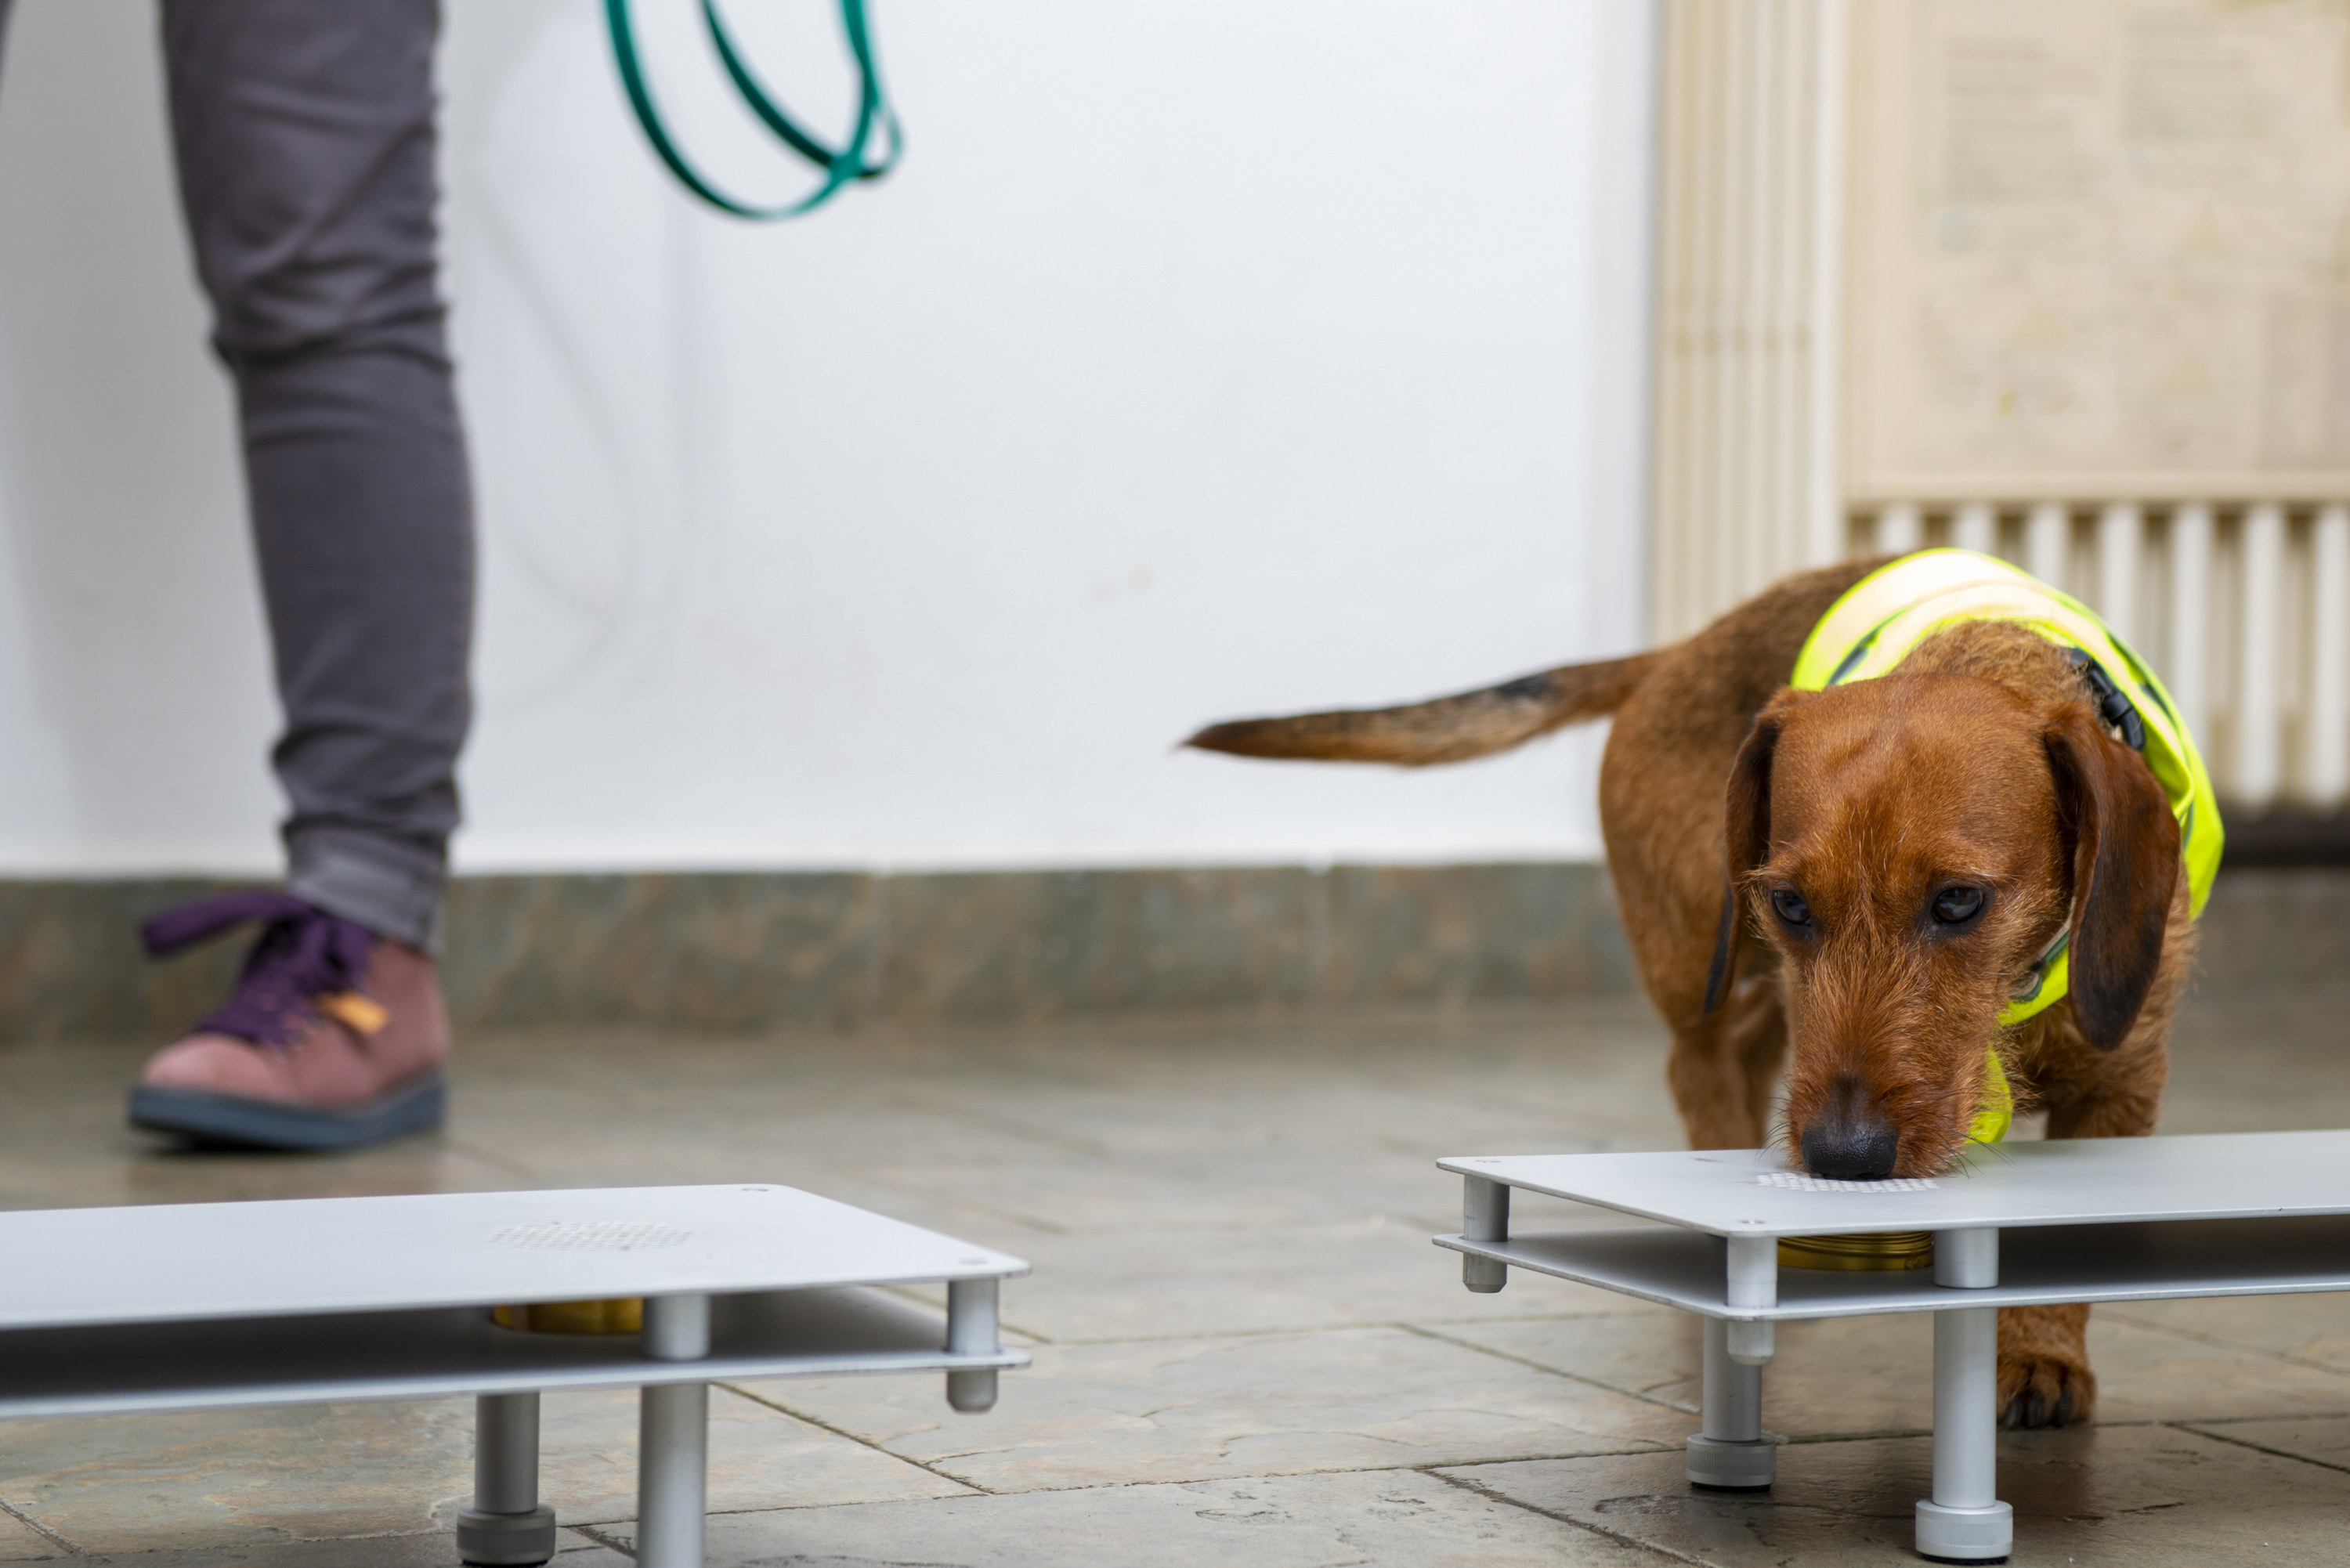 A medical detection dachshund is seen training